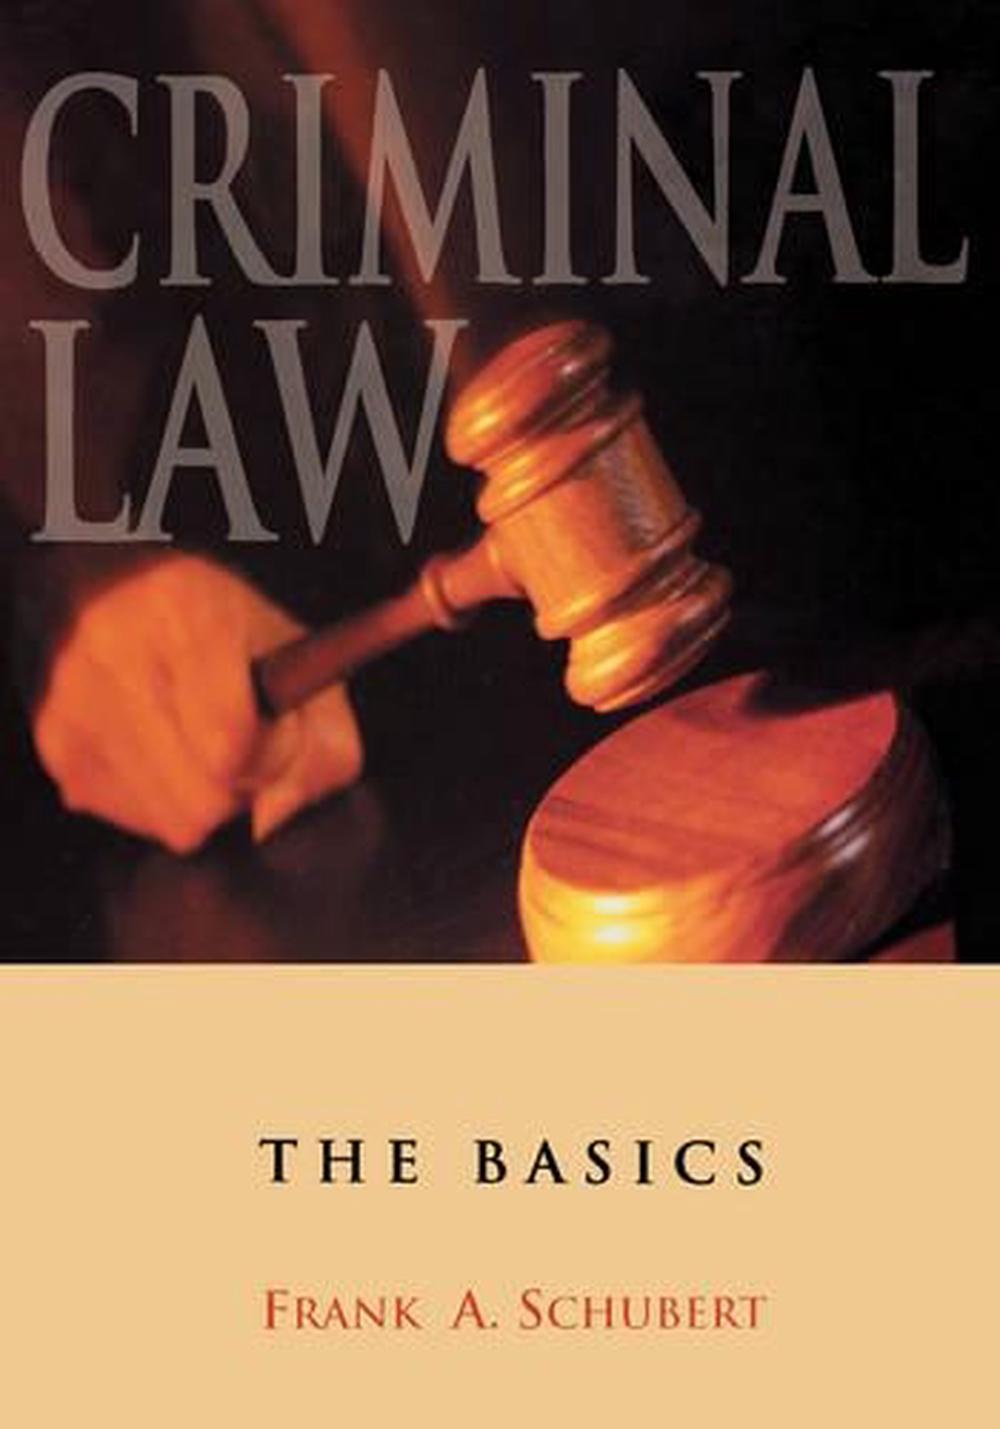 Criminal Law The Basics by Frank A. Schubert (English) Hardcover Book